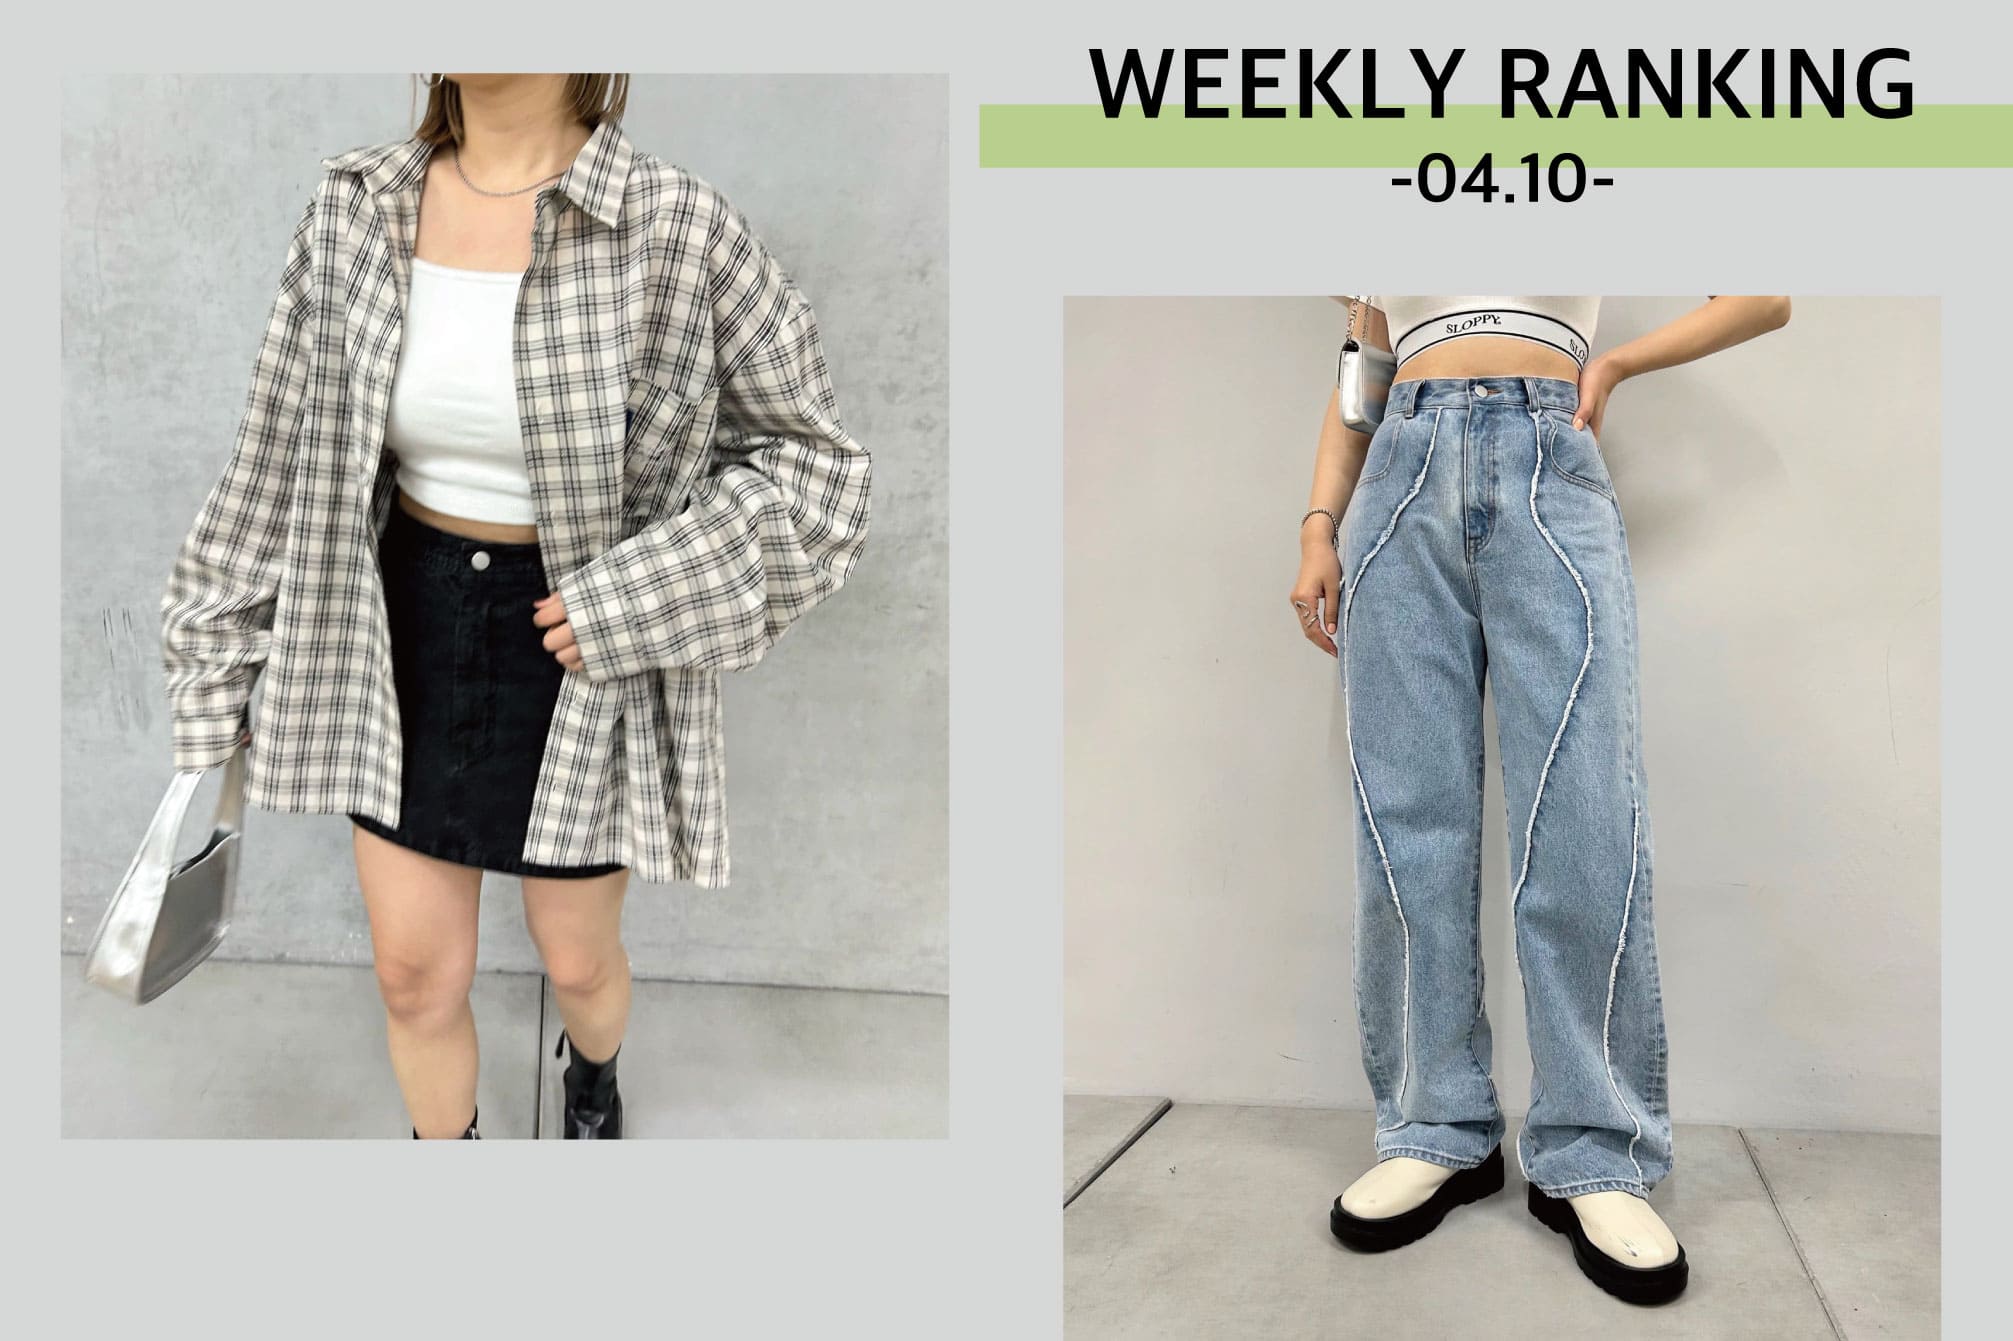 WHO’S WHO gallery 【WEEKÒY RANKING -04.10-】